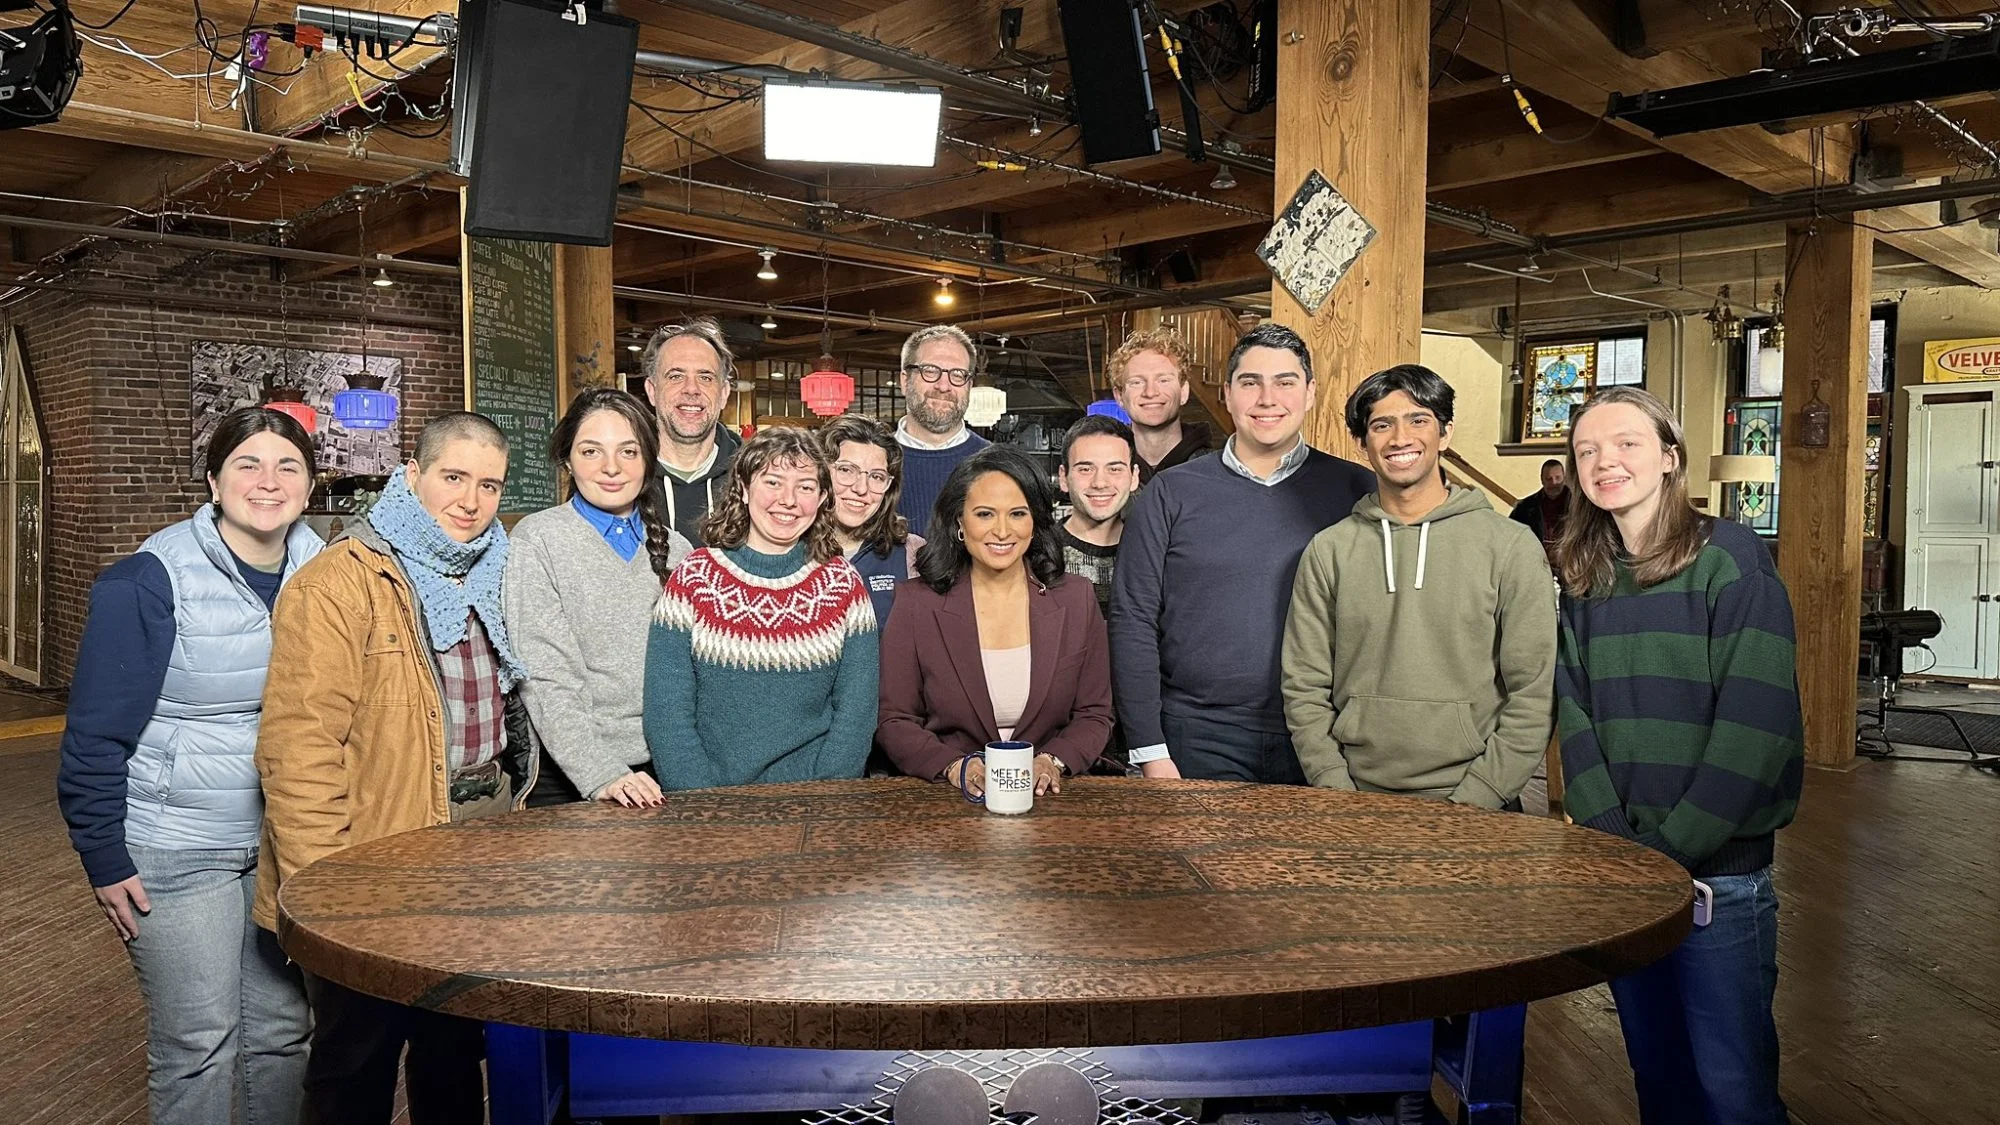 A group of students stands around a wooden desk with the NBC logo. There is camera equipment around the desk signifying that this is a television set.